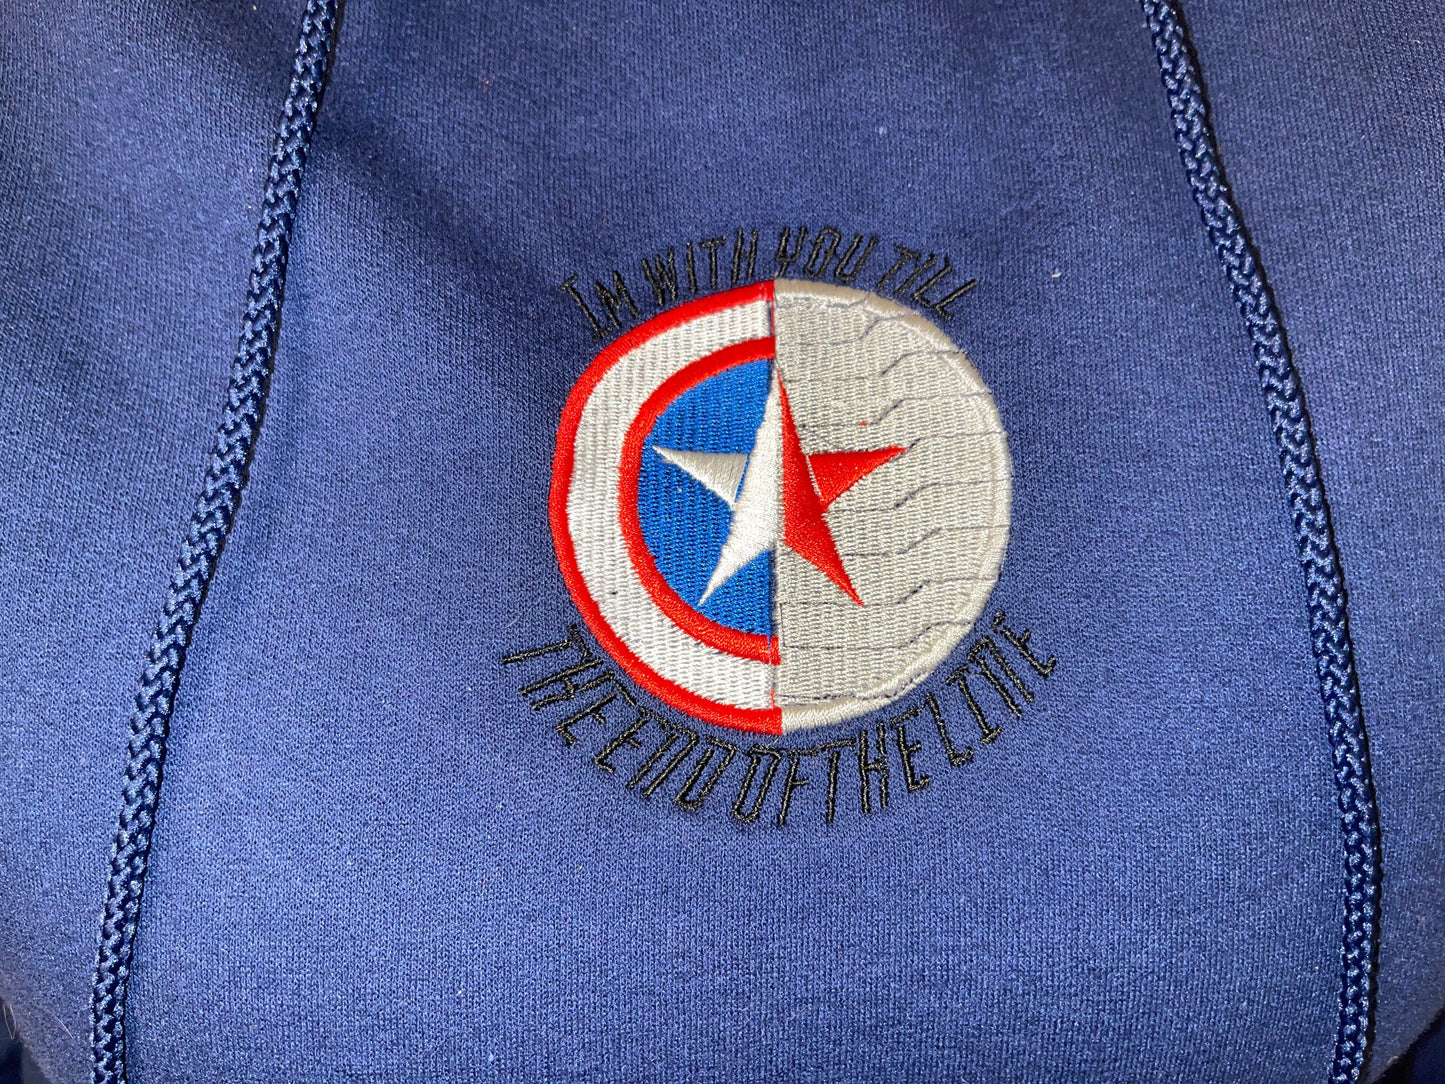 Stucky “I’m with you till the end of the line” embroidered sweatshirt